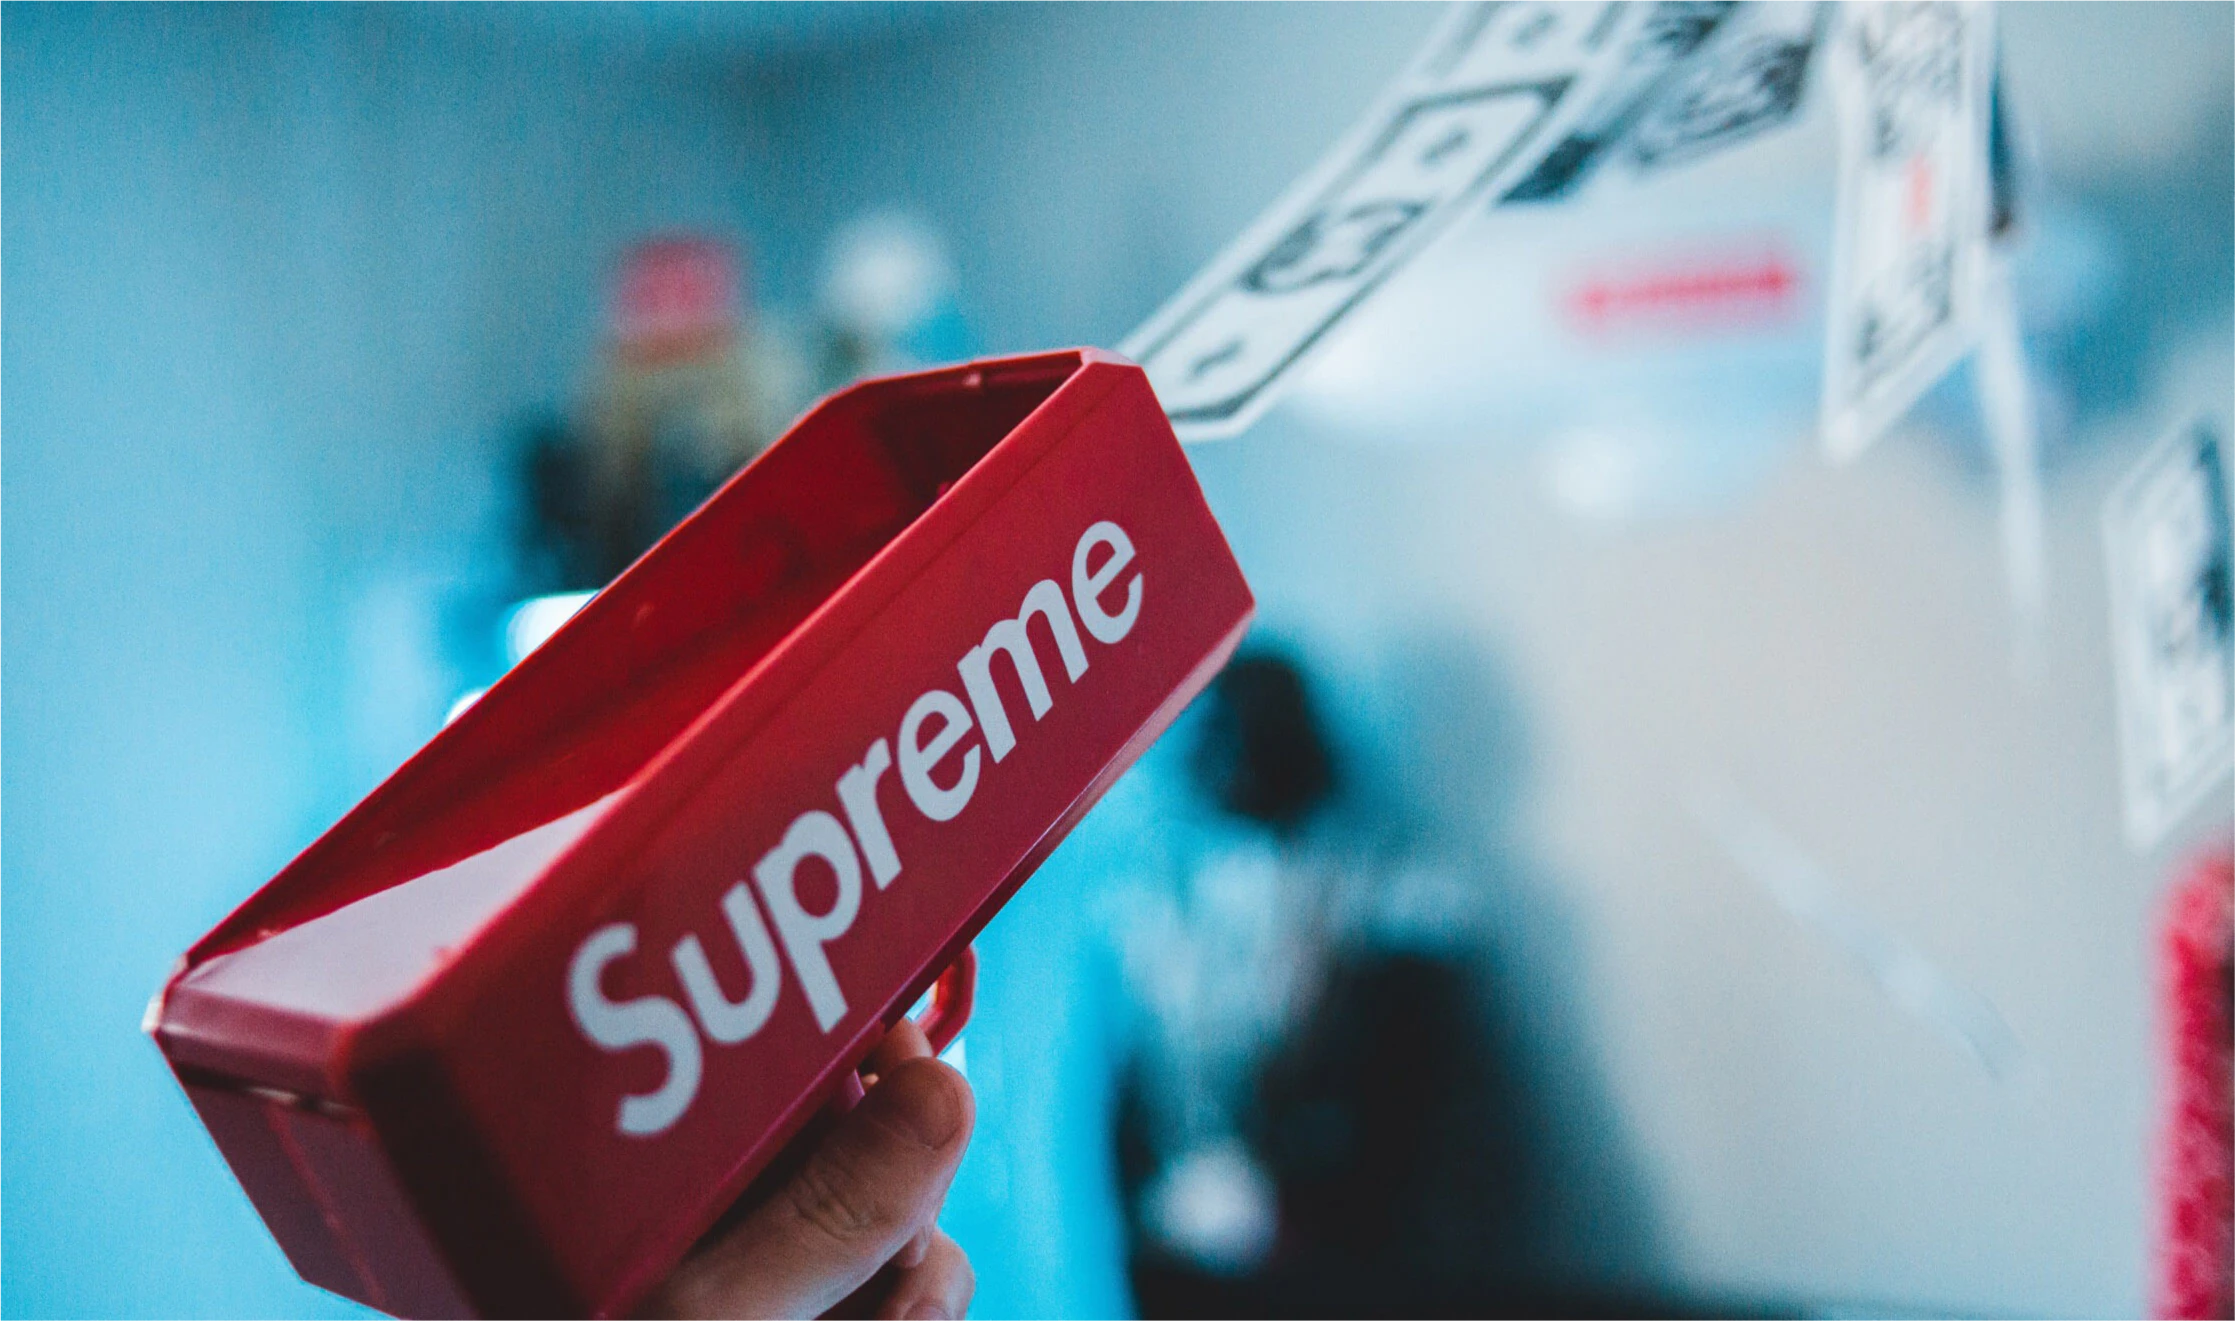 The Supreme Effect: What the streetwear giant can teach all